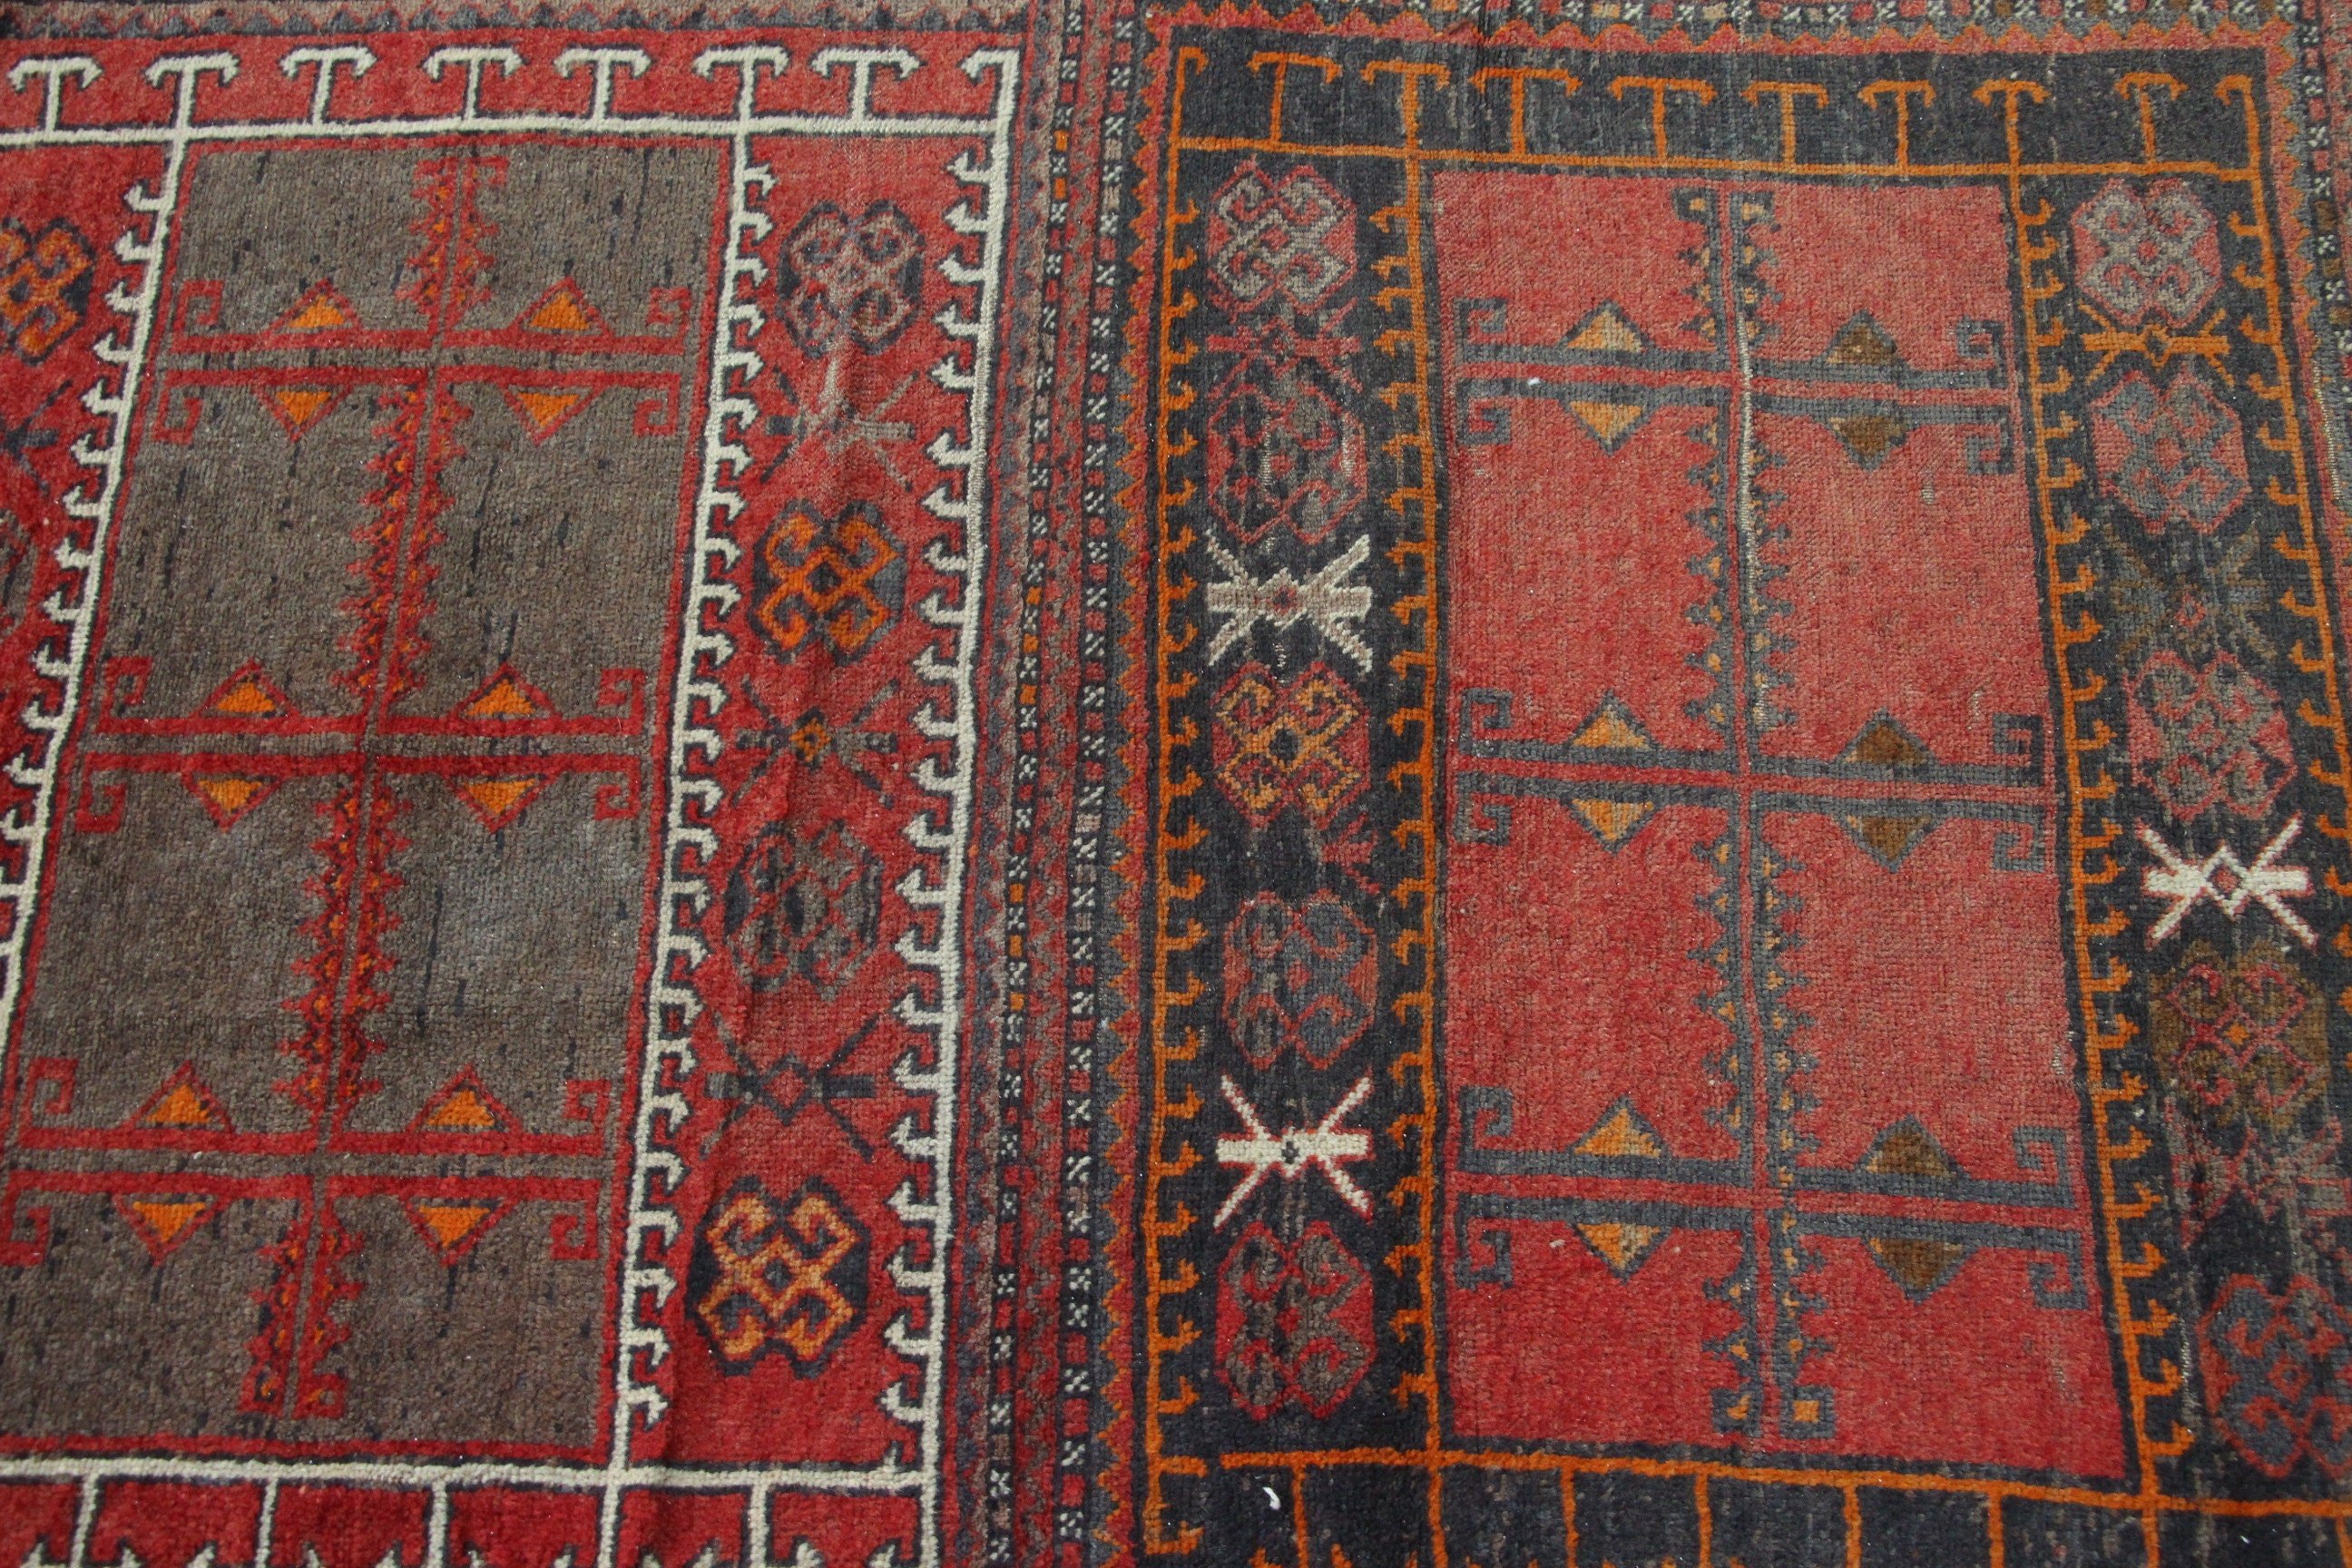 Red Kitchen Rug, Home Decor Rug, Turkish Rug, Anatolian Rugs, Salon Rug, 4.3x9.4 ft Large Rugs, Dining Room Rugs, Cute Rug, Vintage Rugs